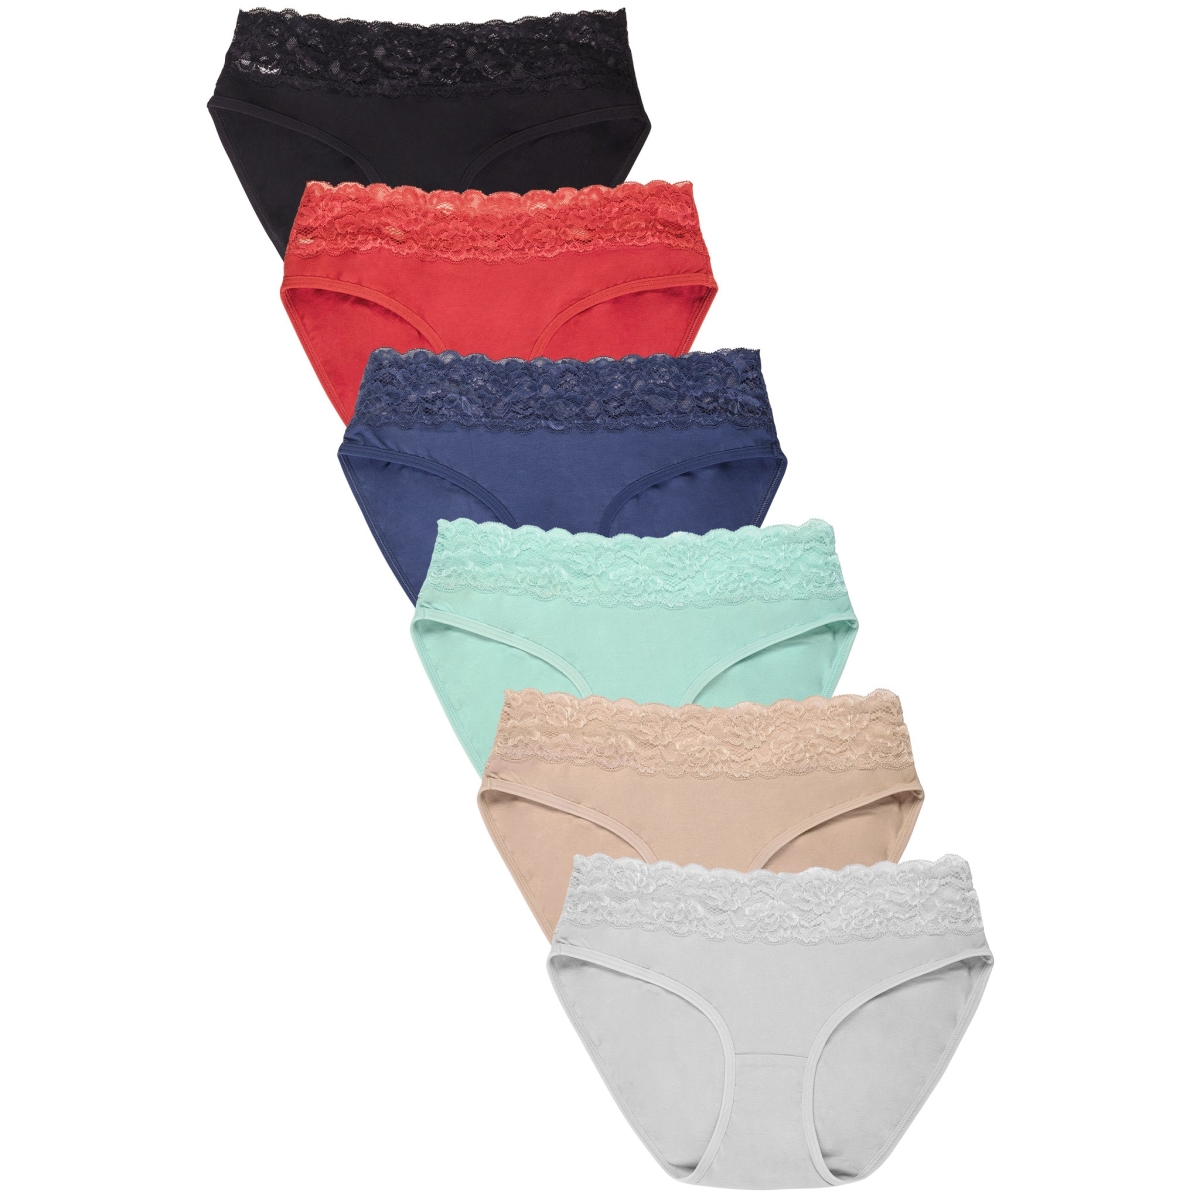 Picture of 247 Frenzy 247-LP1394CK3-SM Womens Essentials Cotton Stretch Bikini Panty Underwear - Assorted Color - Small - Pack of 6